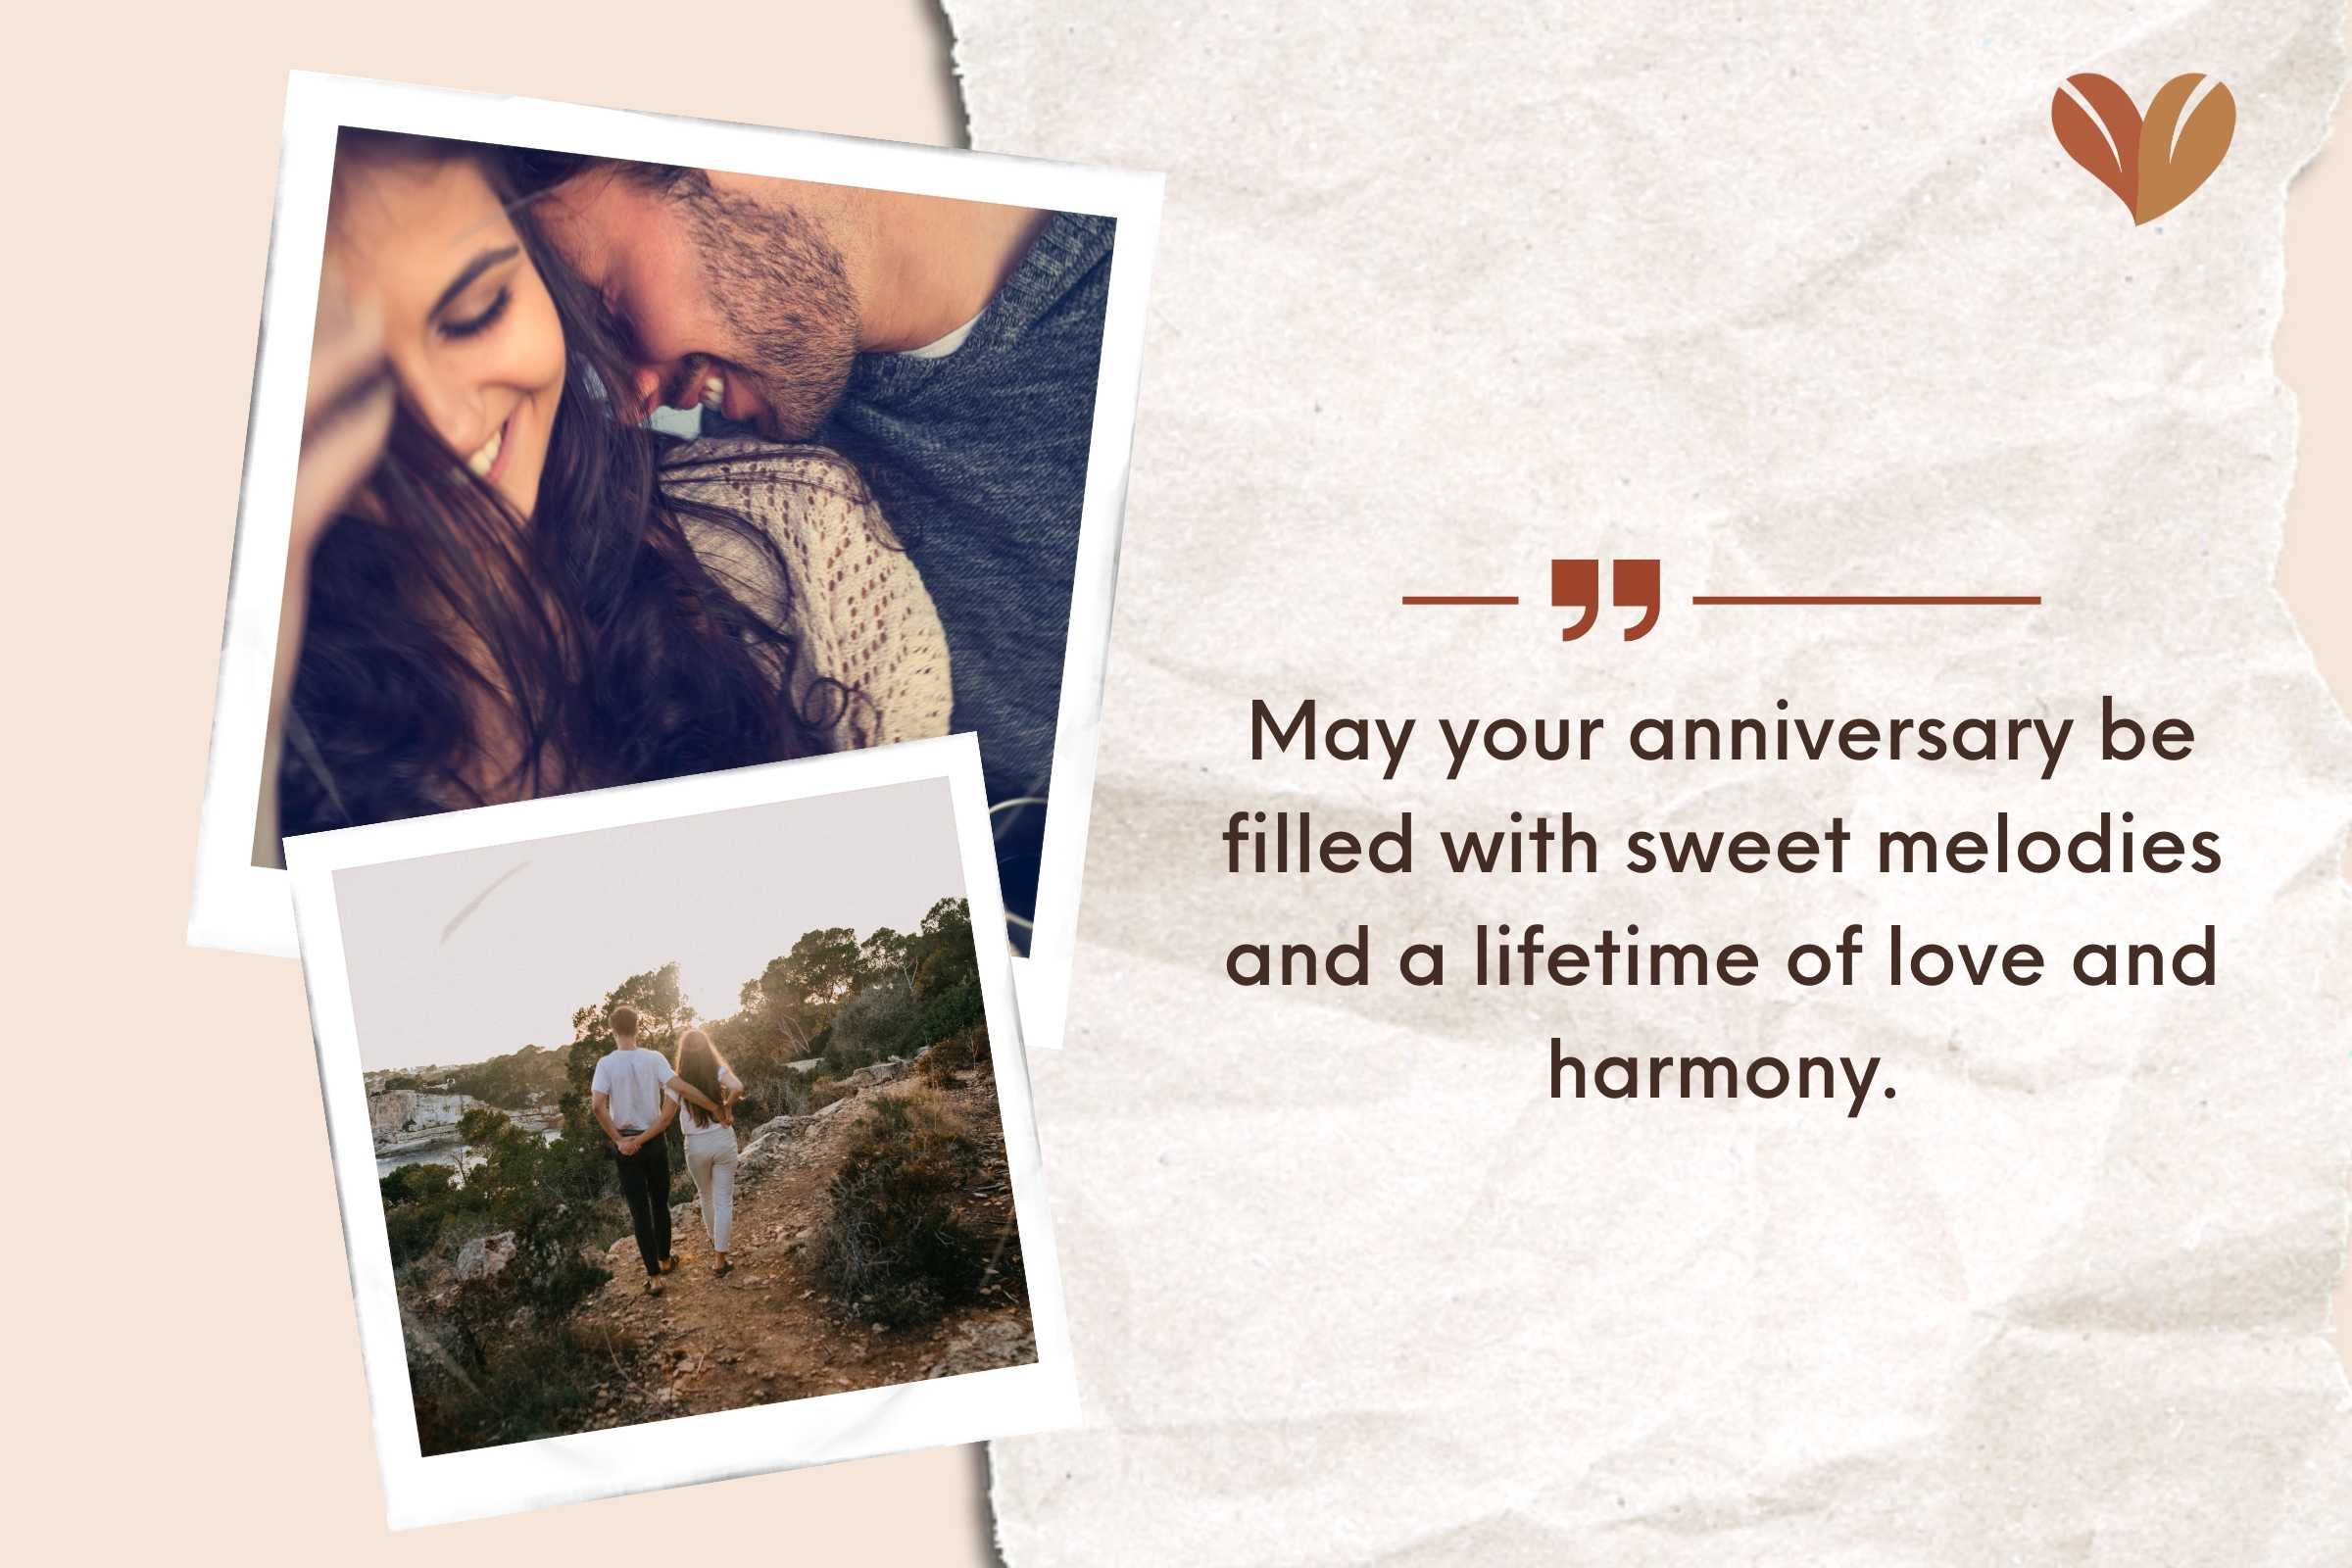 An enchanting celebration of love between a daughter and her beloved son-in-law, happy anniversary!